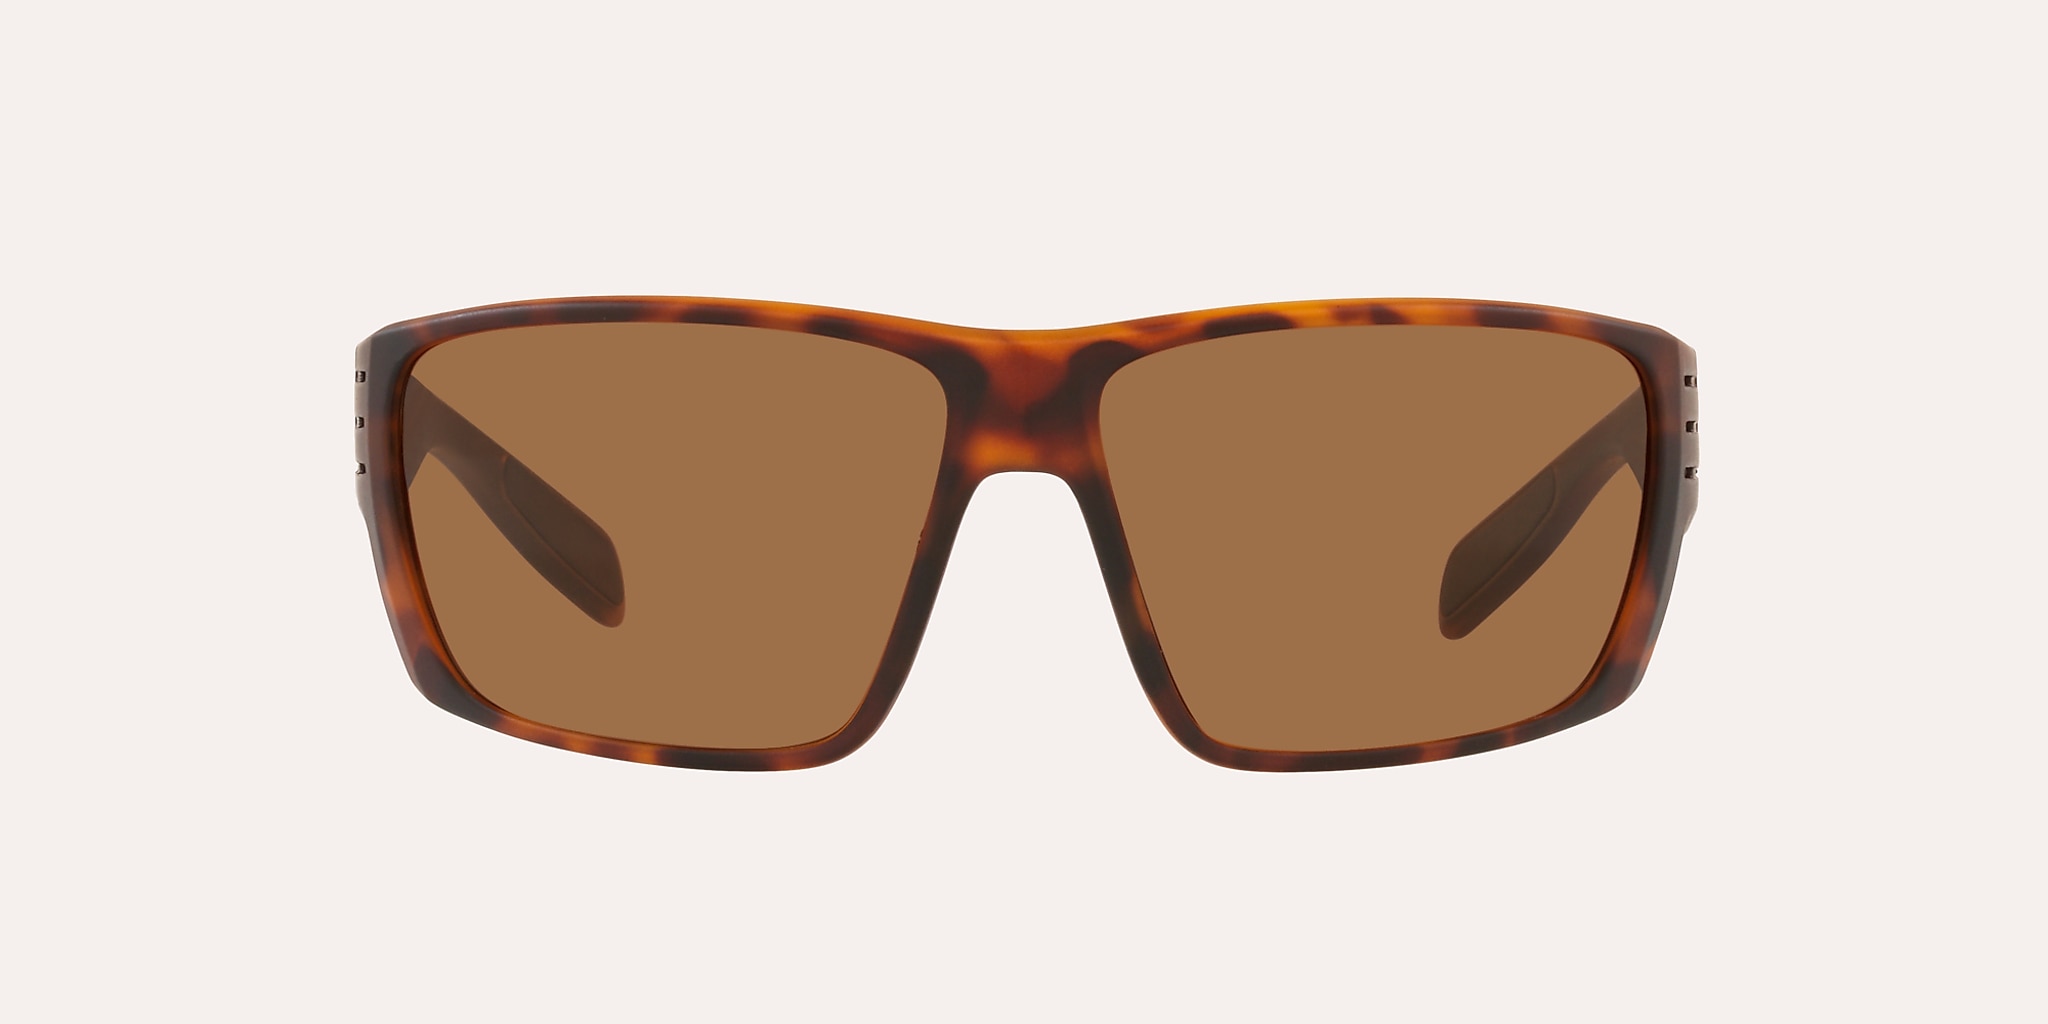 https://assets.nativeyewear.com/is/image/Native/764824019739_noshad_fr.png?impolicy=6S_resize&wid=2048&bgcolor=%23f5f0ee